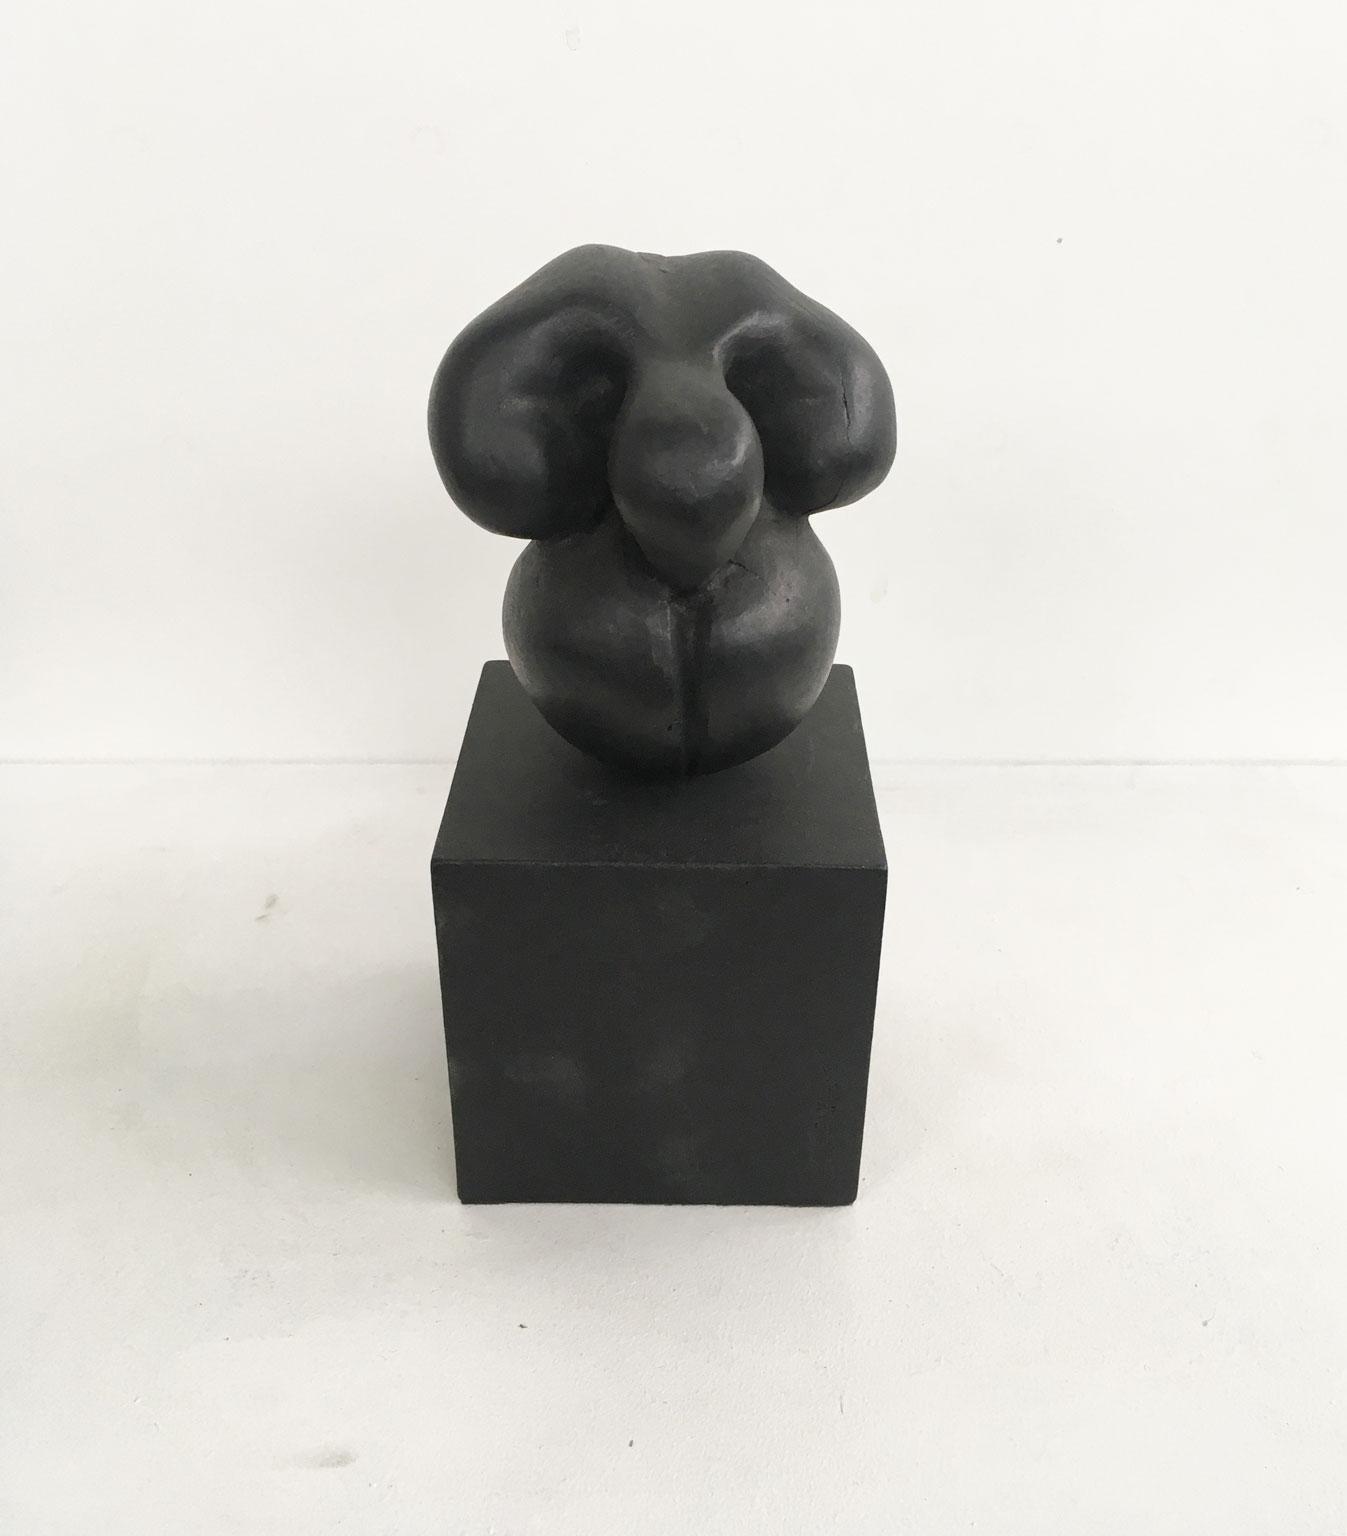 This is an engaging black aluminum sculpture create by the Italian artist Patrizia Guerresi, in the 1988. The piece is a multiple of 1000 specimen on a black wooden base. The title of this artwork is 